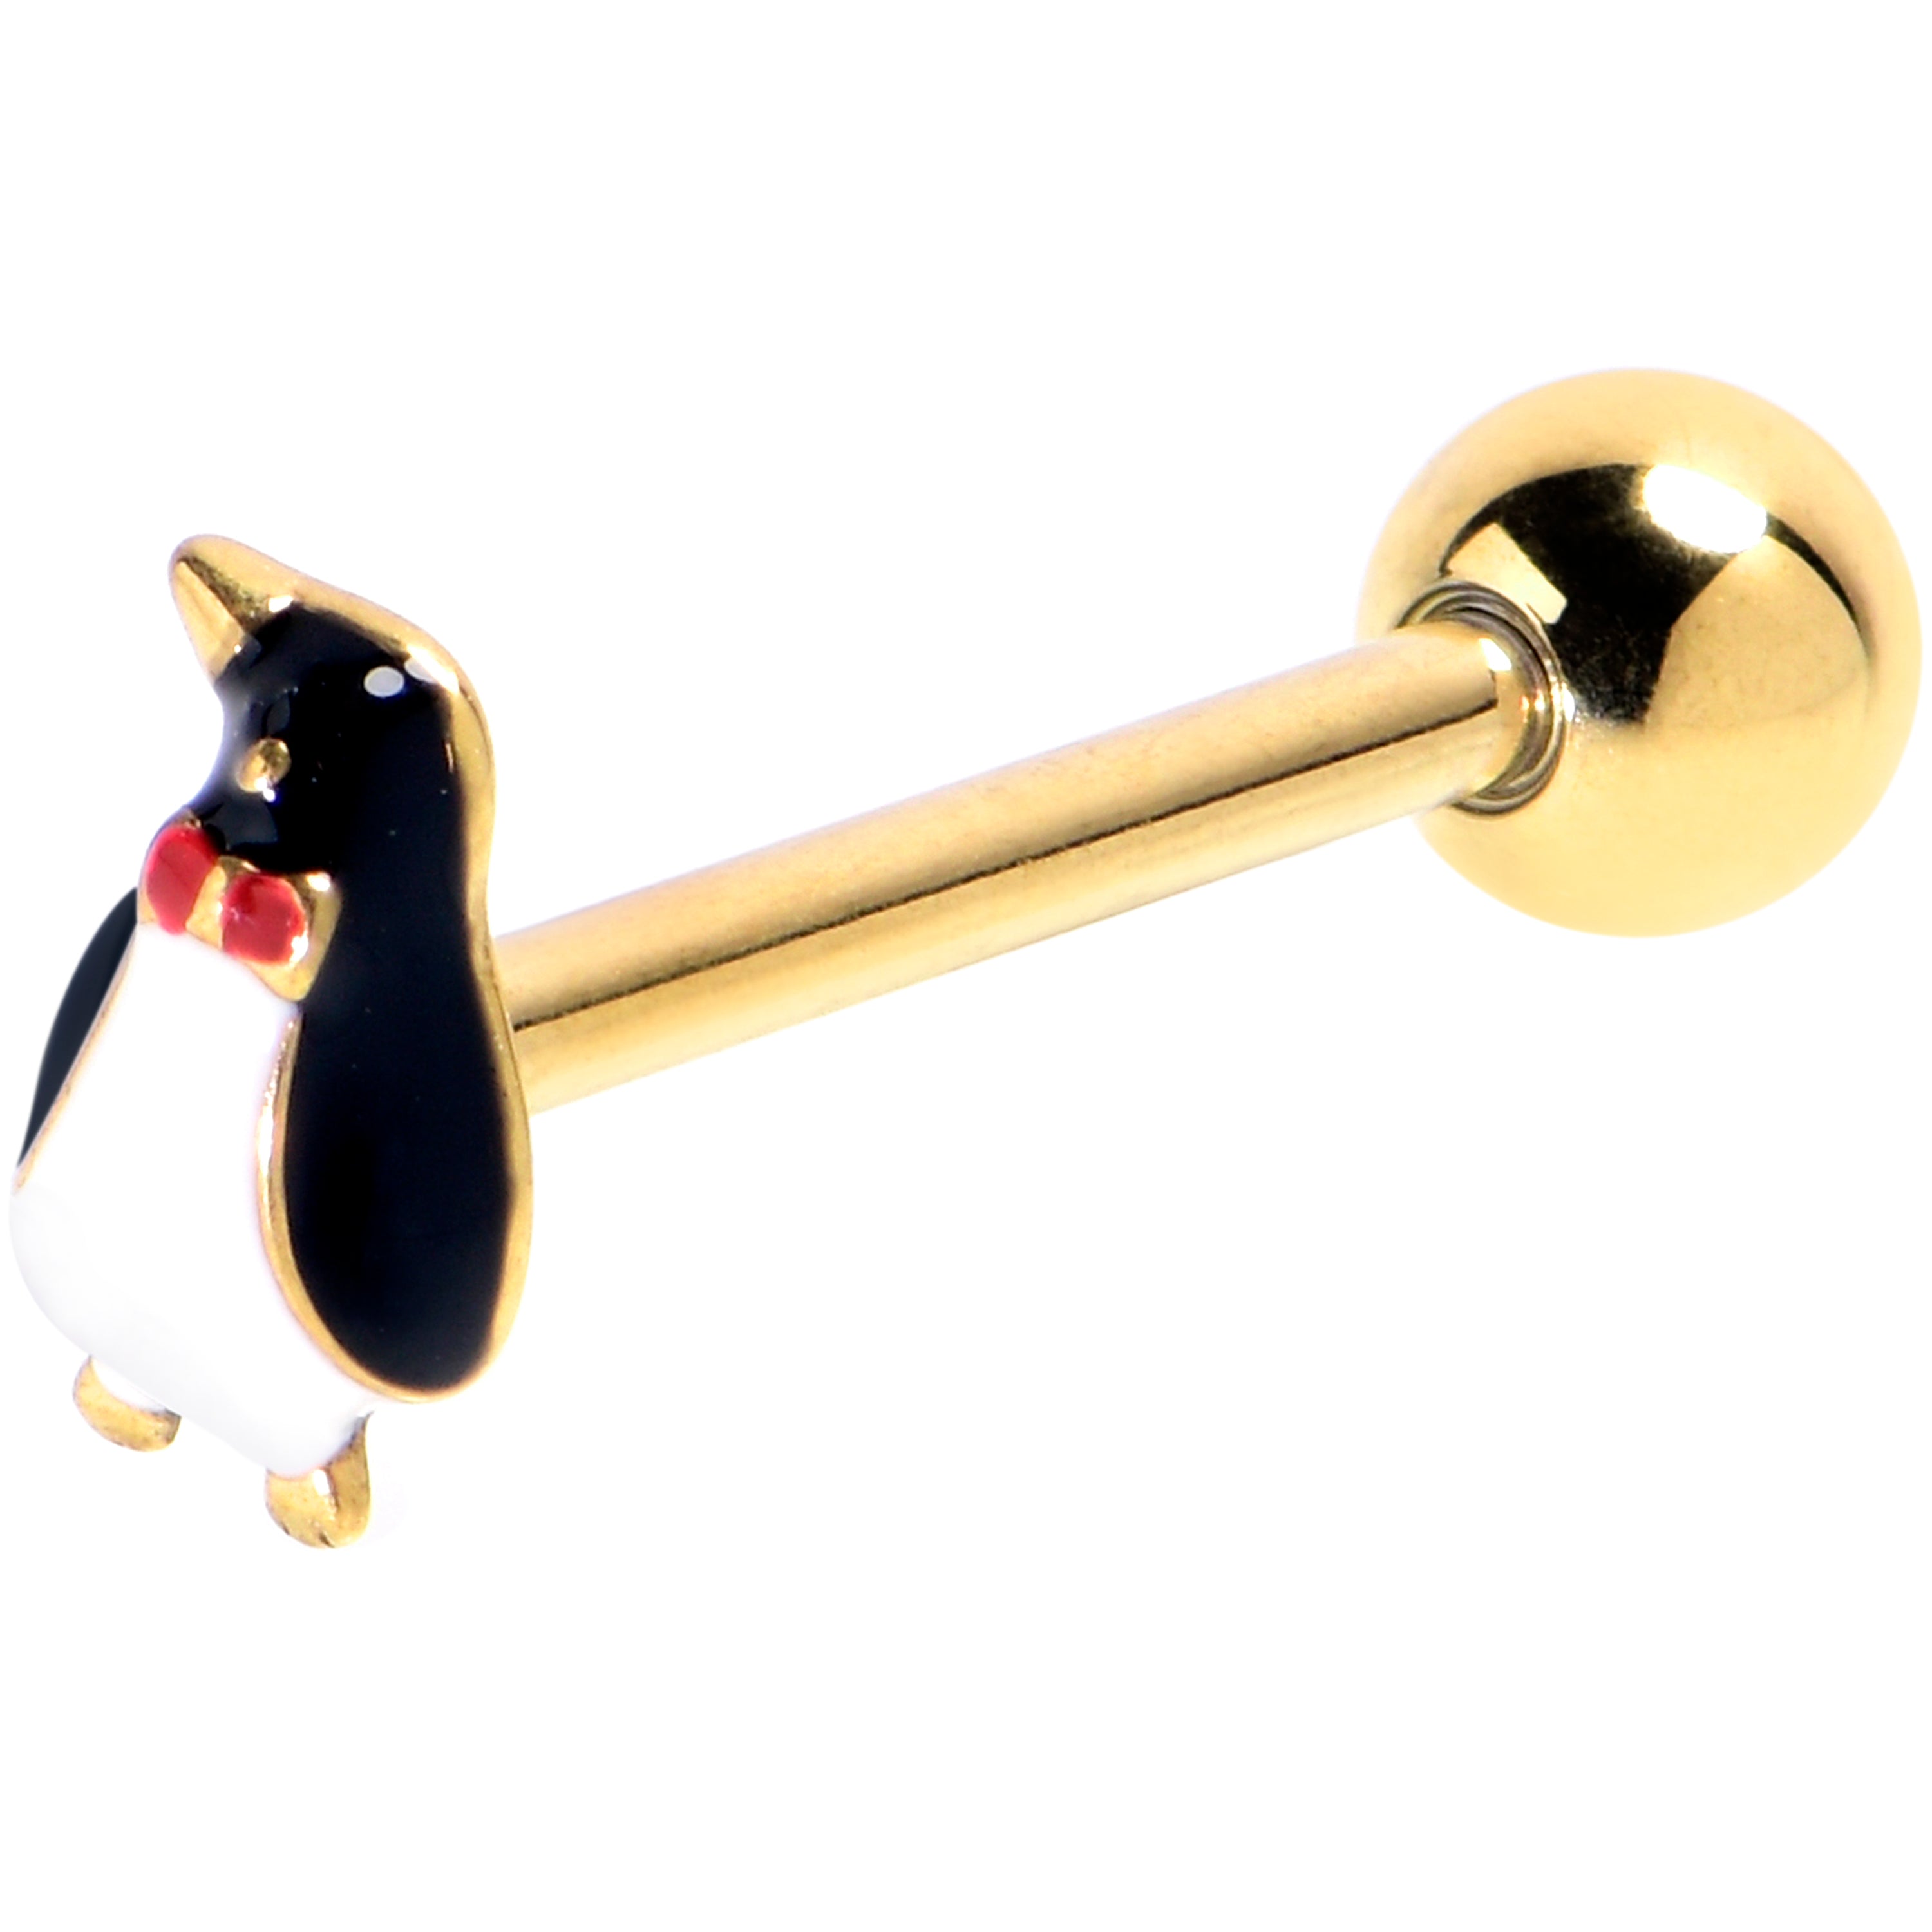 Gold Tone Bow Tie Penguin Barbell Tongue Ring